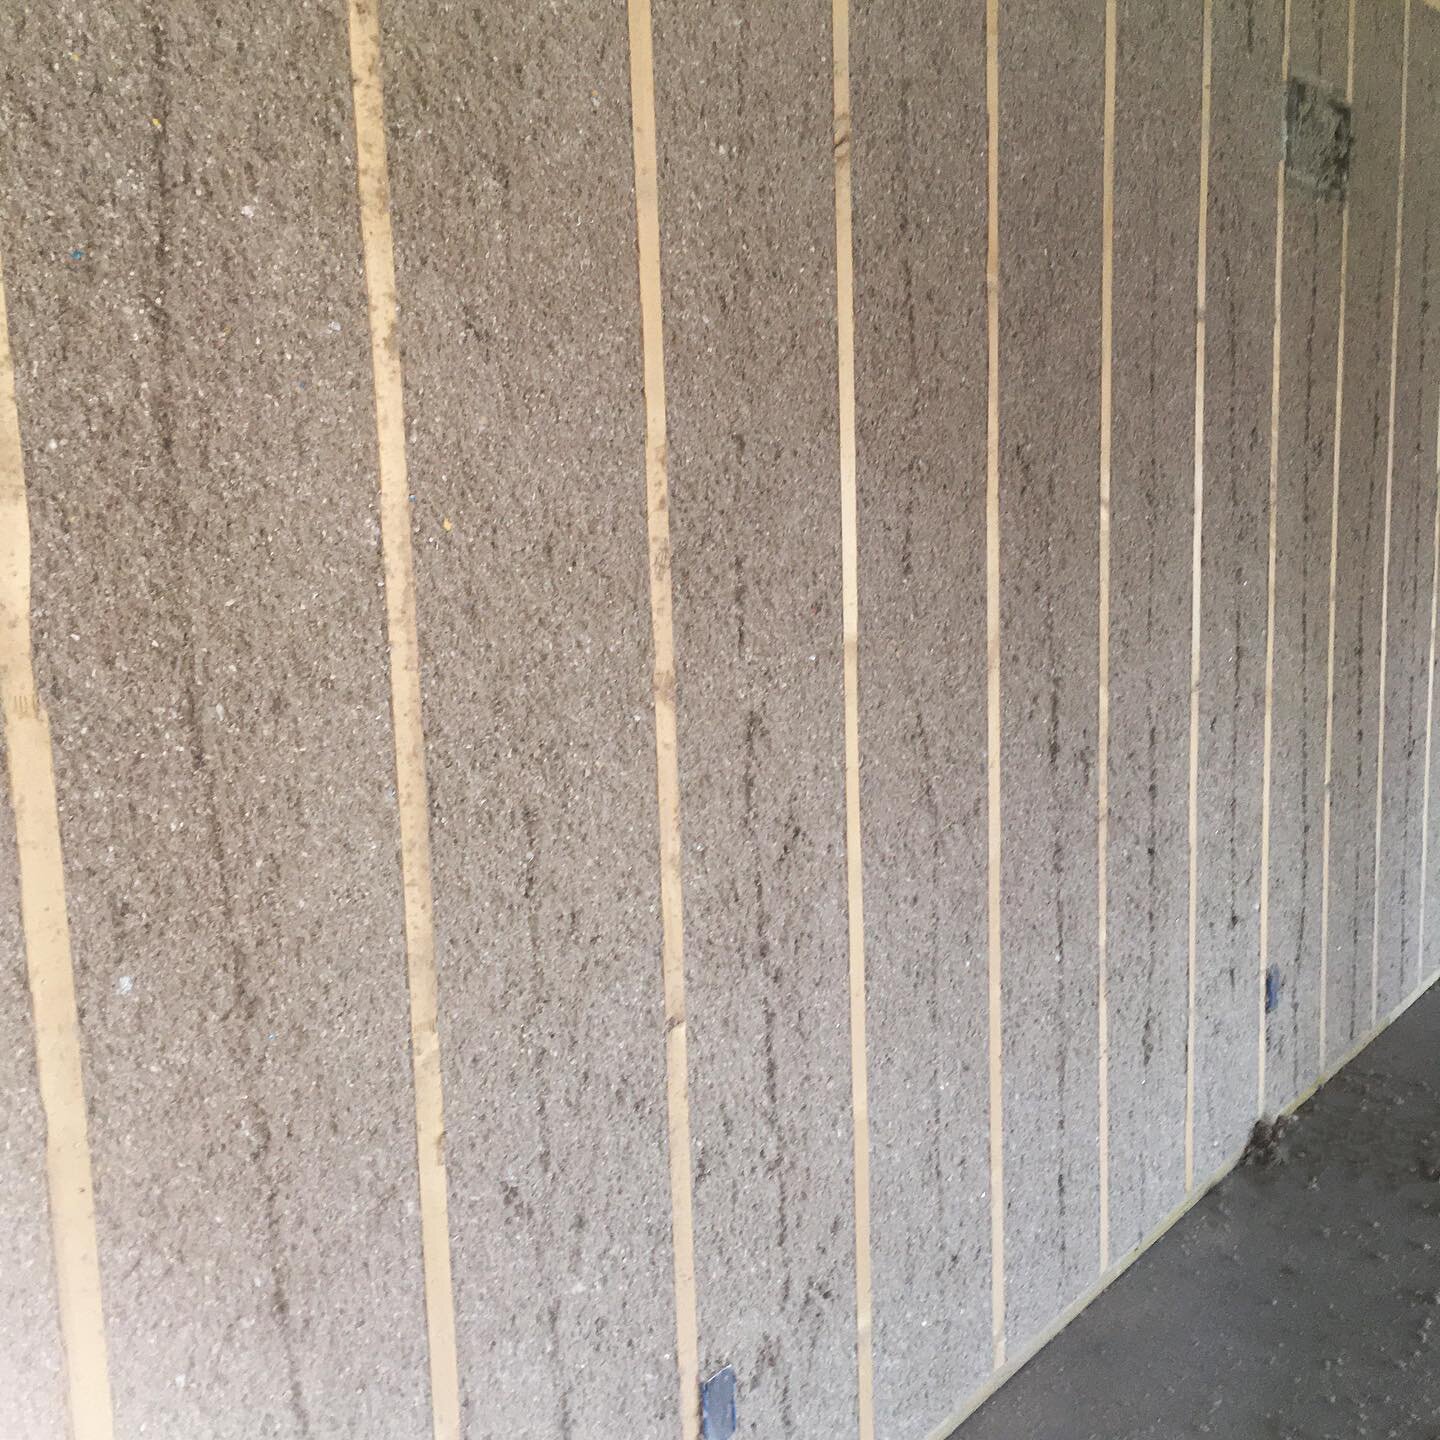 The end result of wall sprayed cellulose always looks👌🏼
With a great air seal, good r-value, and environmentally friendly cellulose - this make for a solid insulation choice. The most important thing being to give adequate time to dry in the cavity